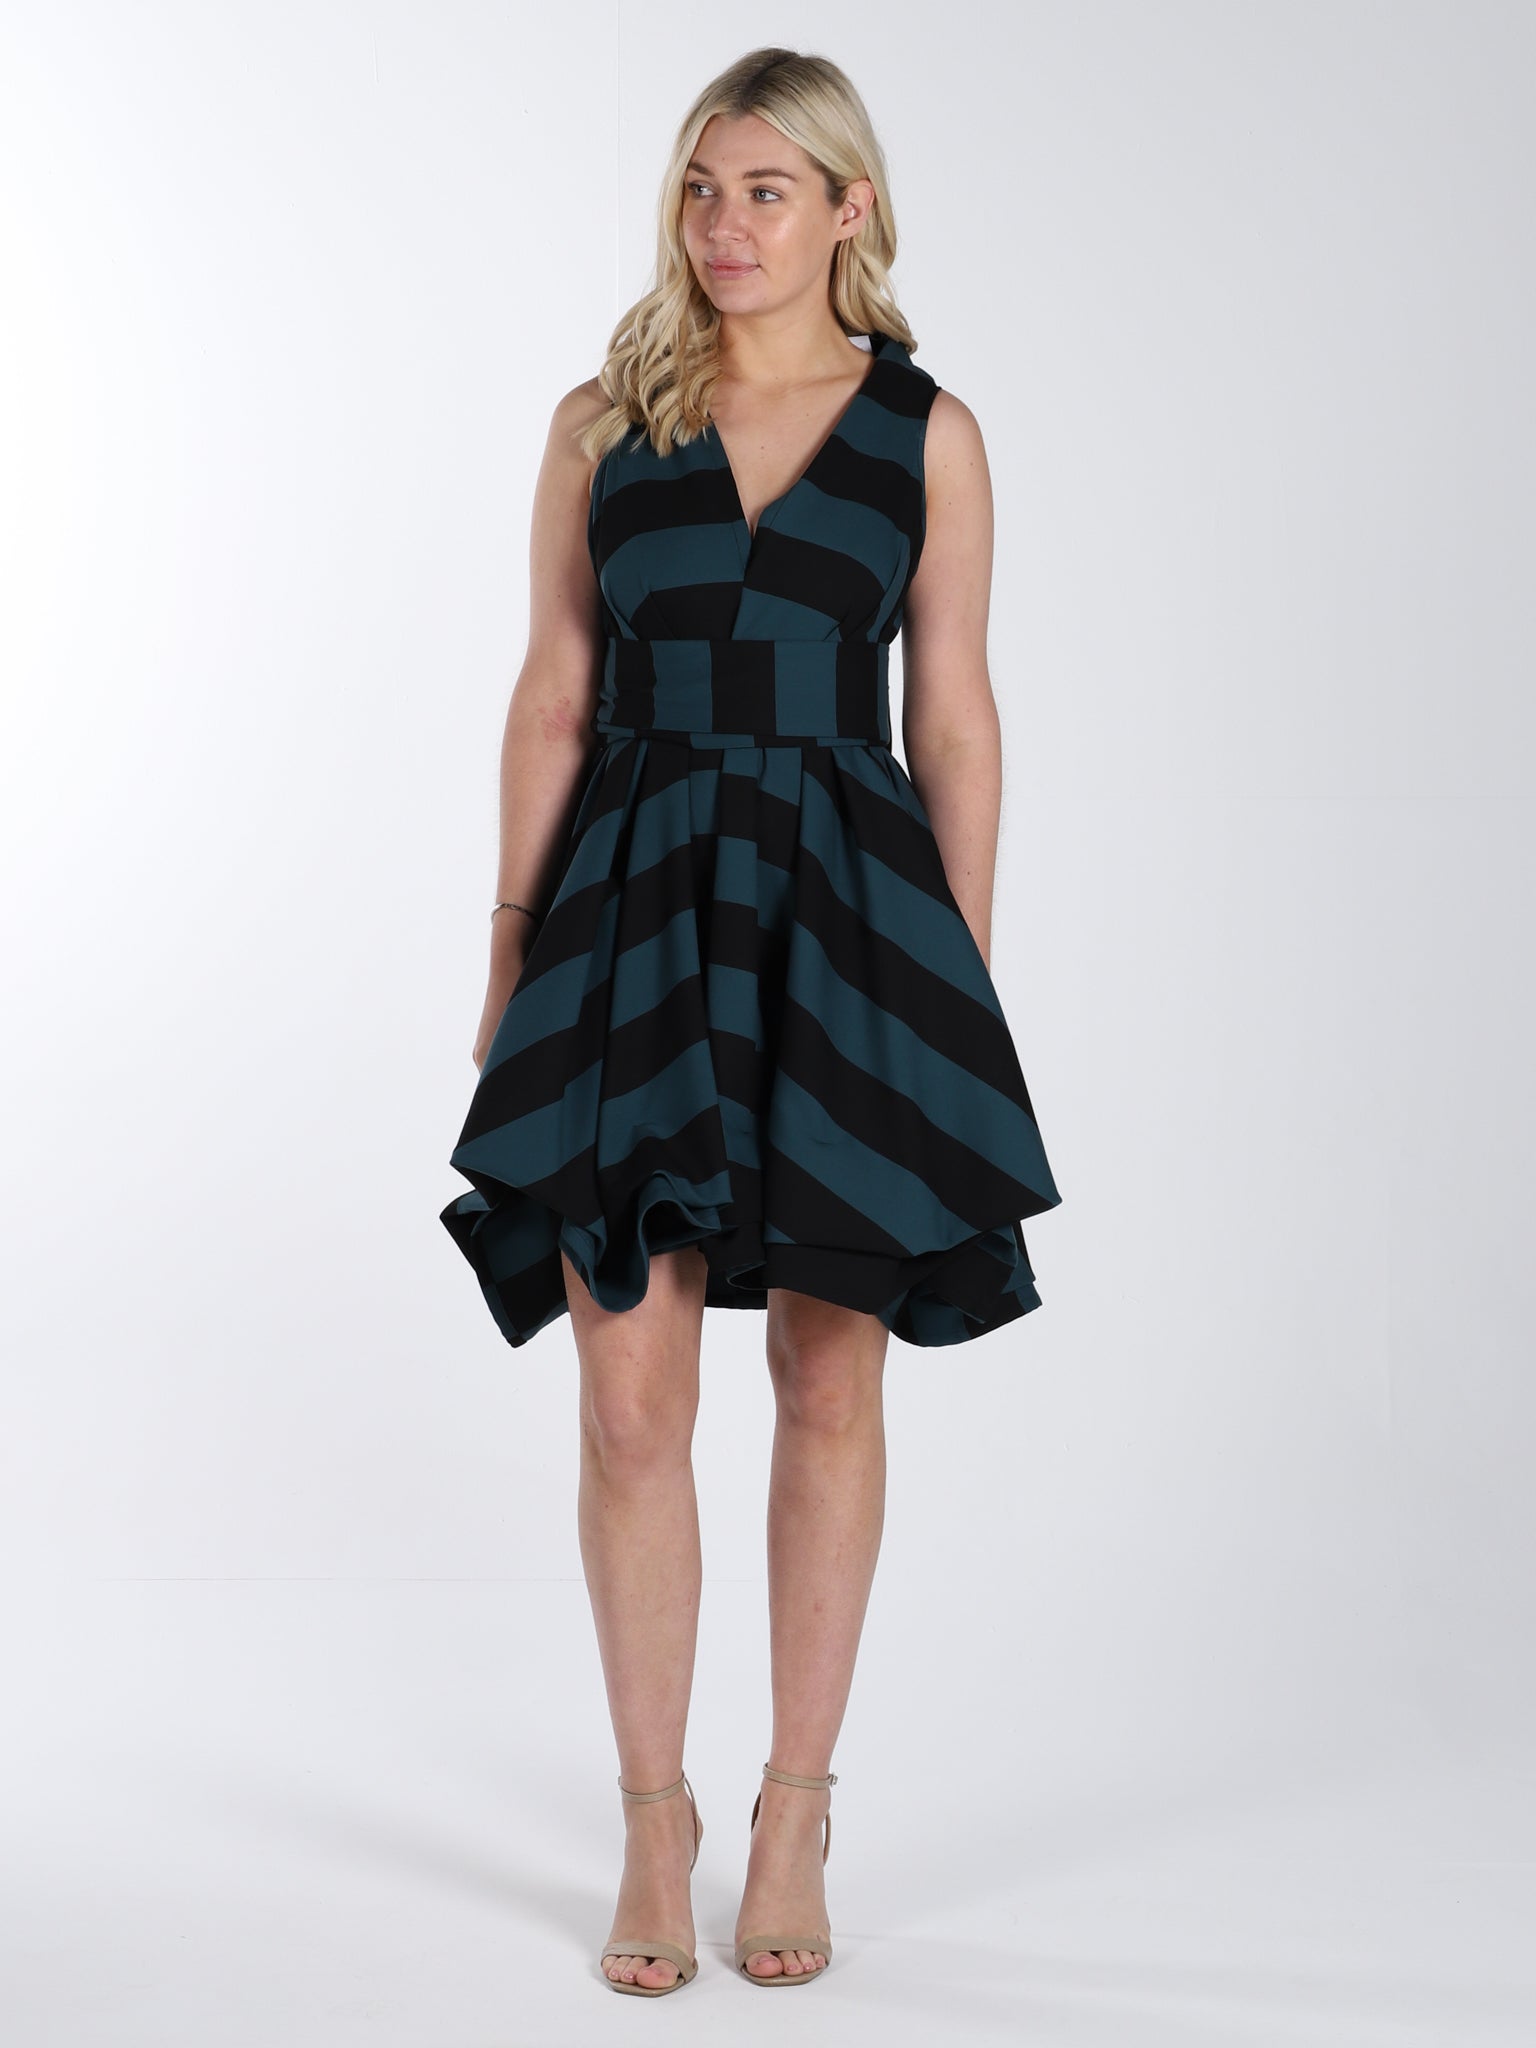 Green and Black Stripe May Dress